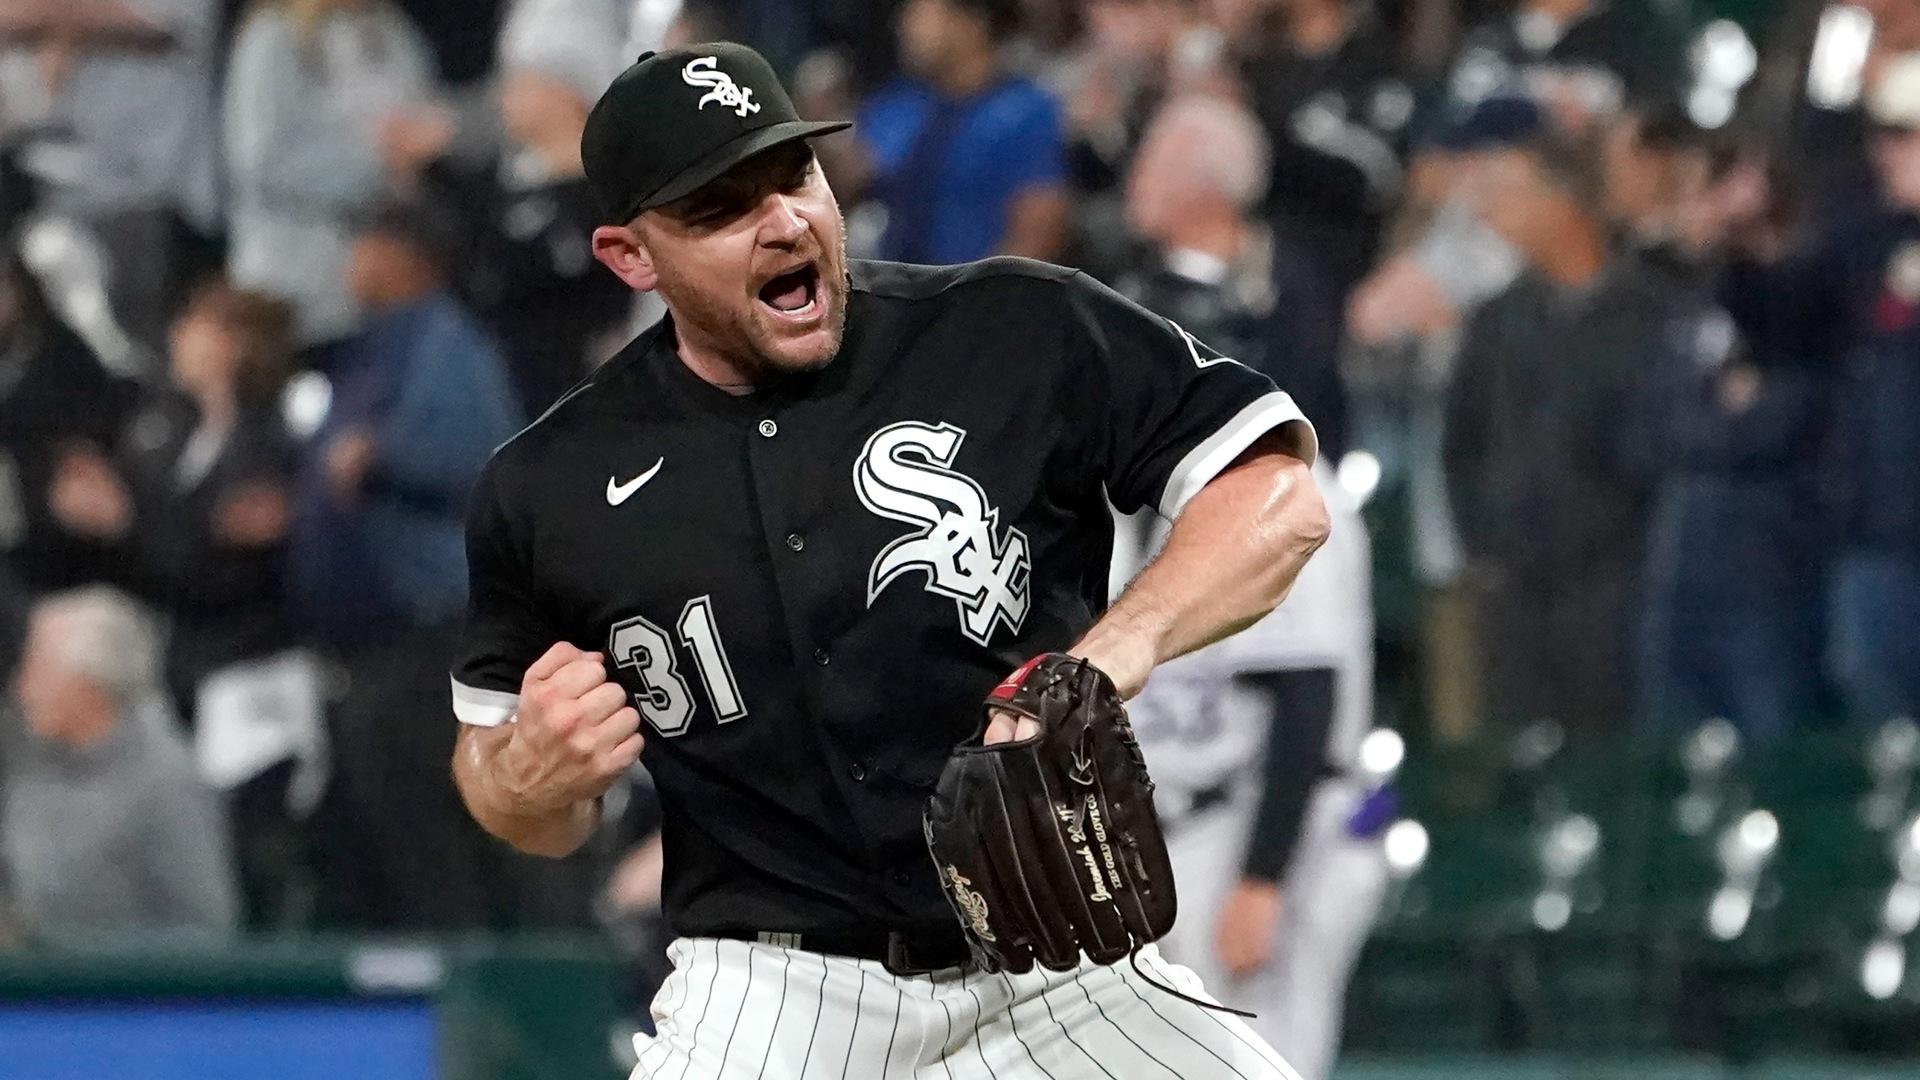 Chicago White Sox relief pitcher Liam Hendriks celebrates the team’s 4-2 win over the Colorado Rockies in a baseball game Tuesday, Sept. 13, 2022, in Chicago. (AP Photo / Charles Rex Arbogast, File)